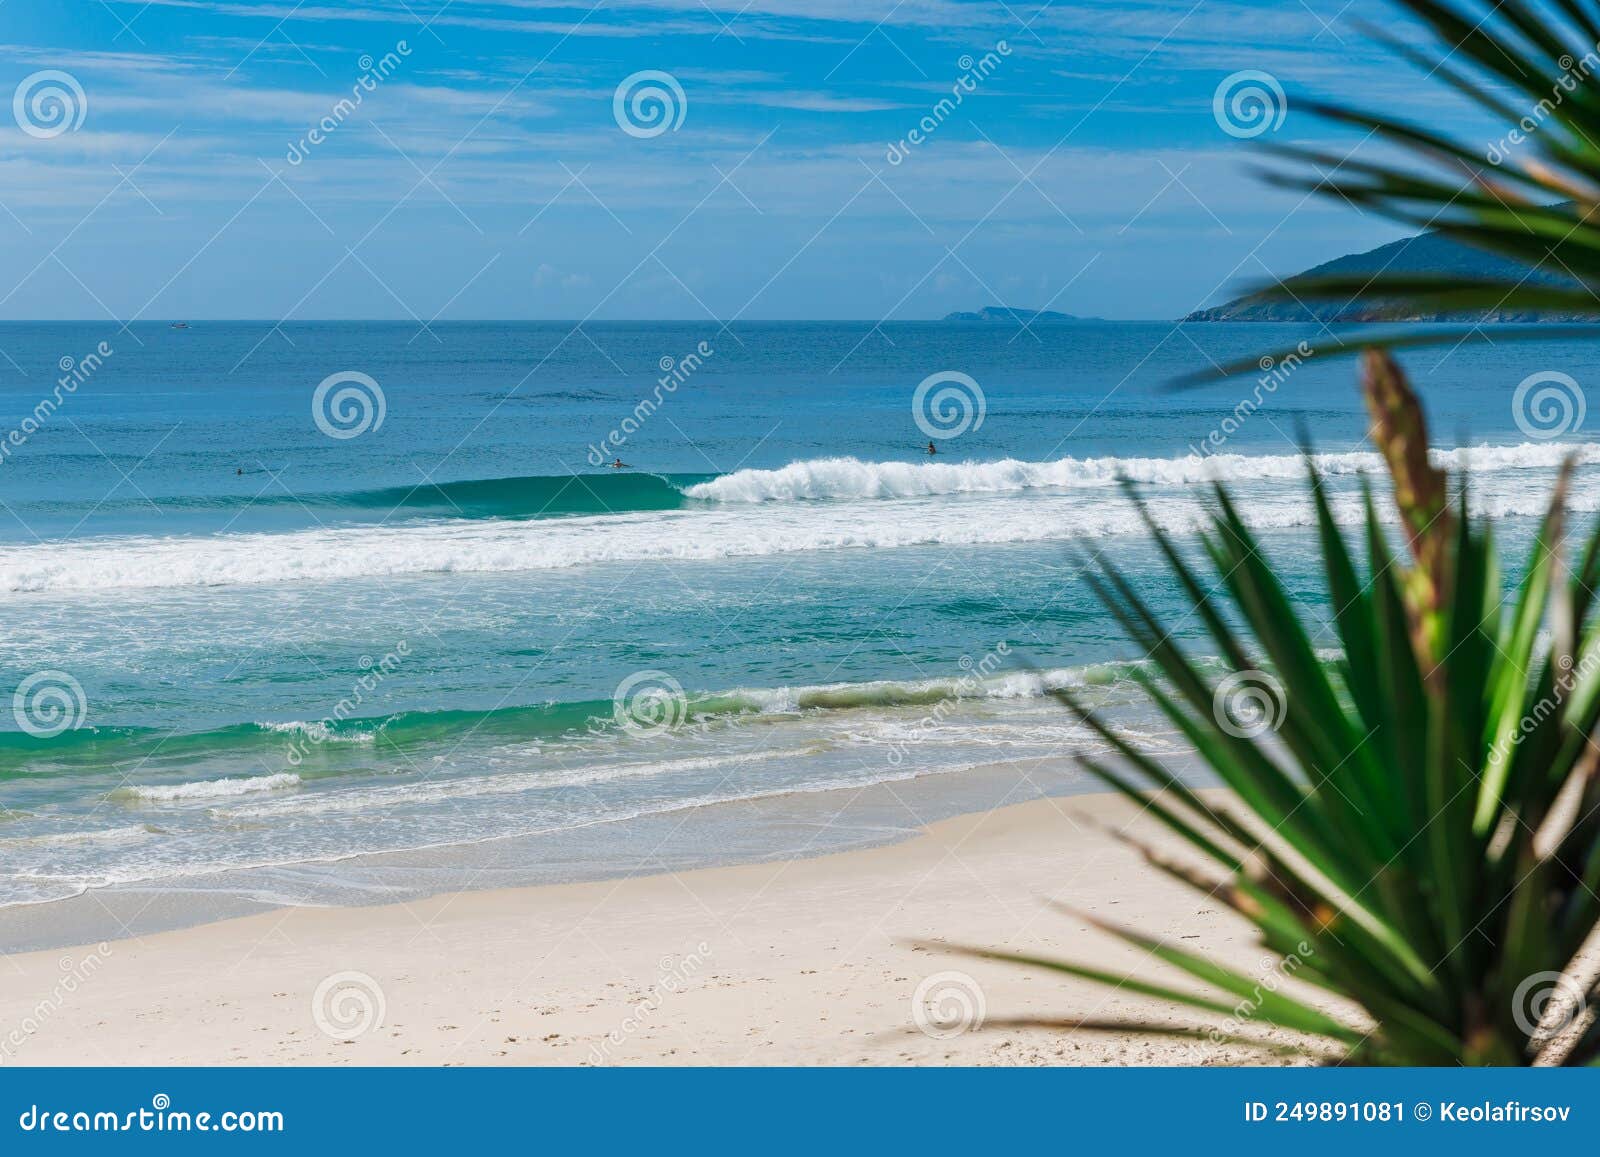 holiday beach and ocean with perfect waves in brazil. morro das pedras beach in florianopolis